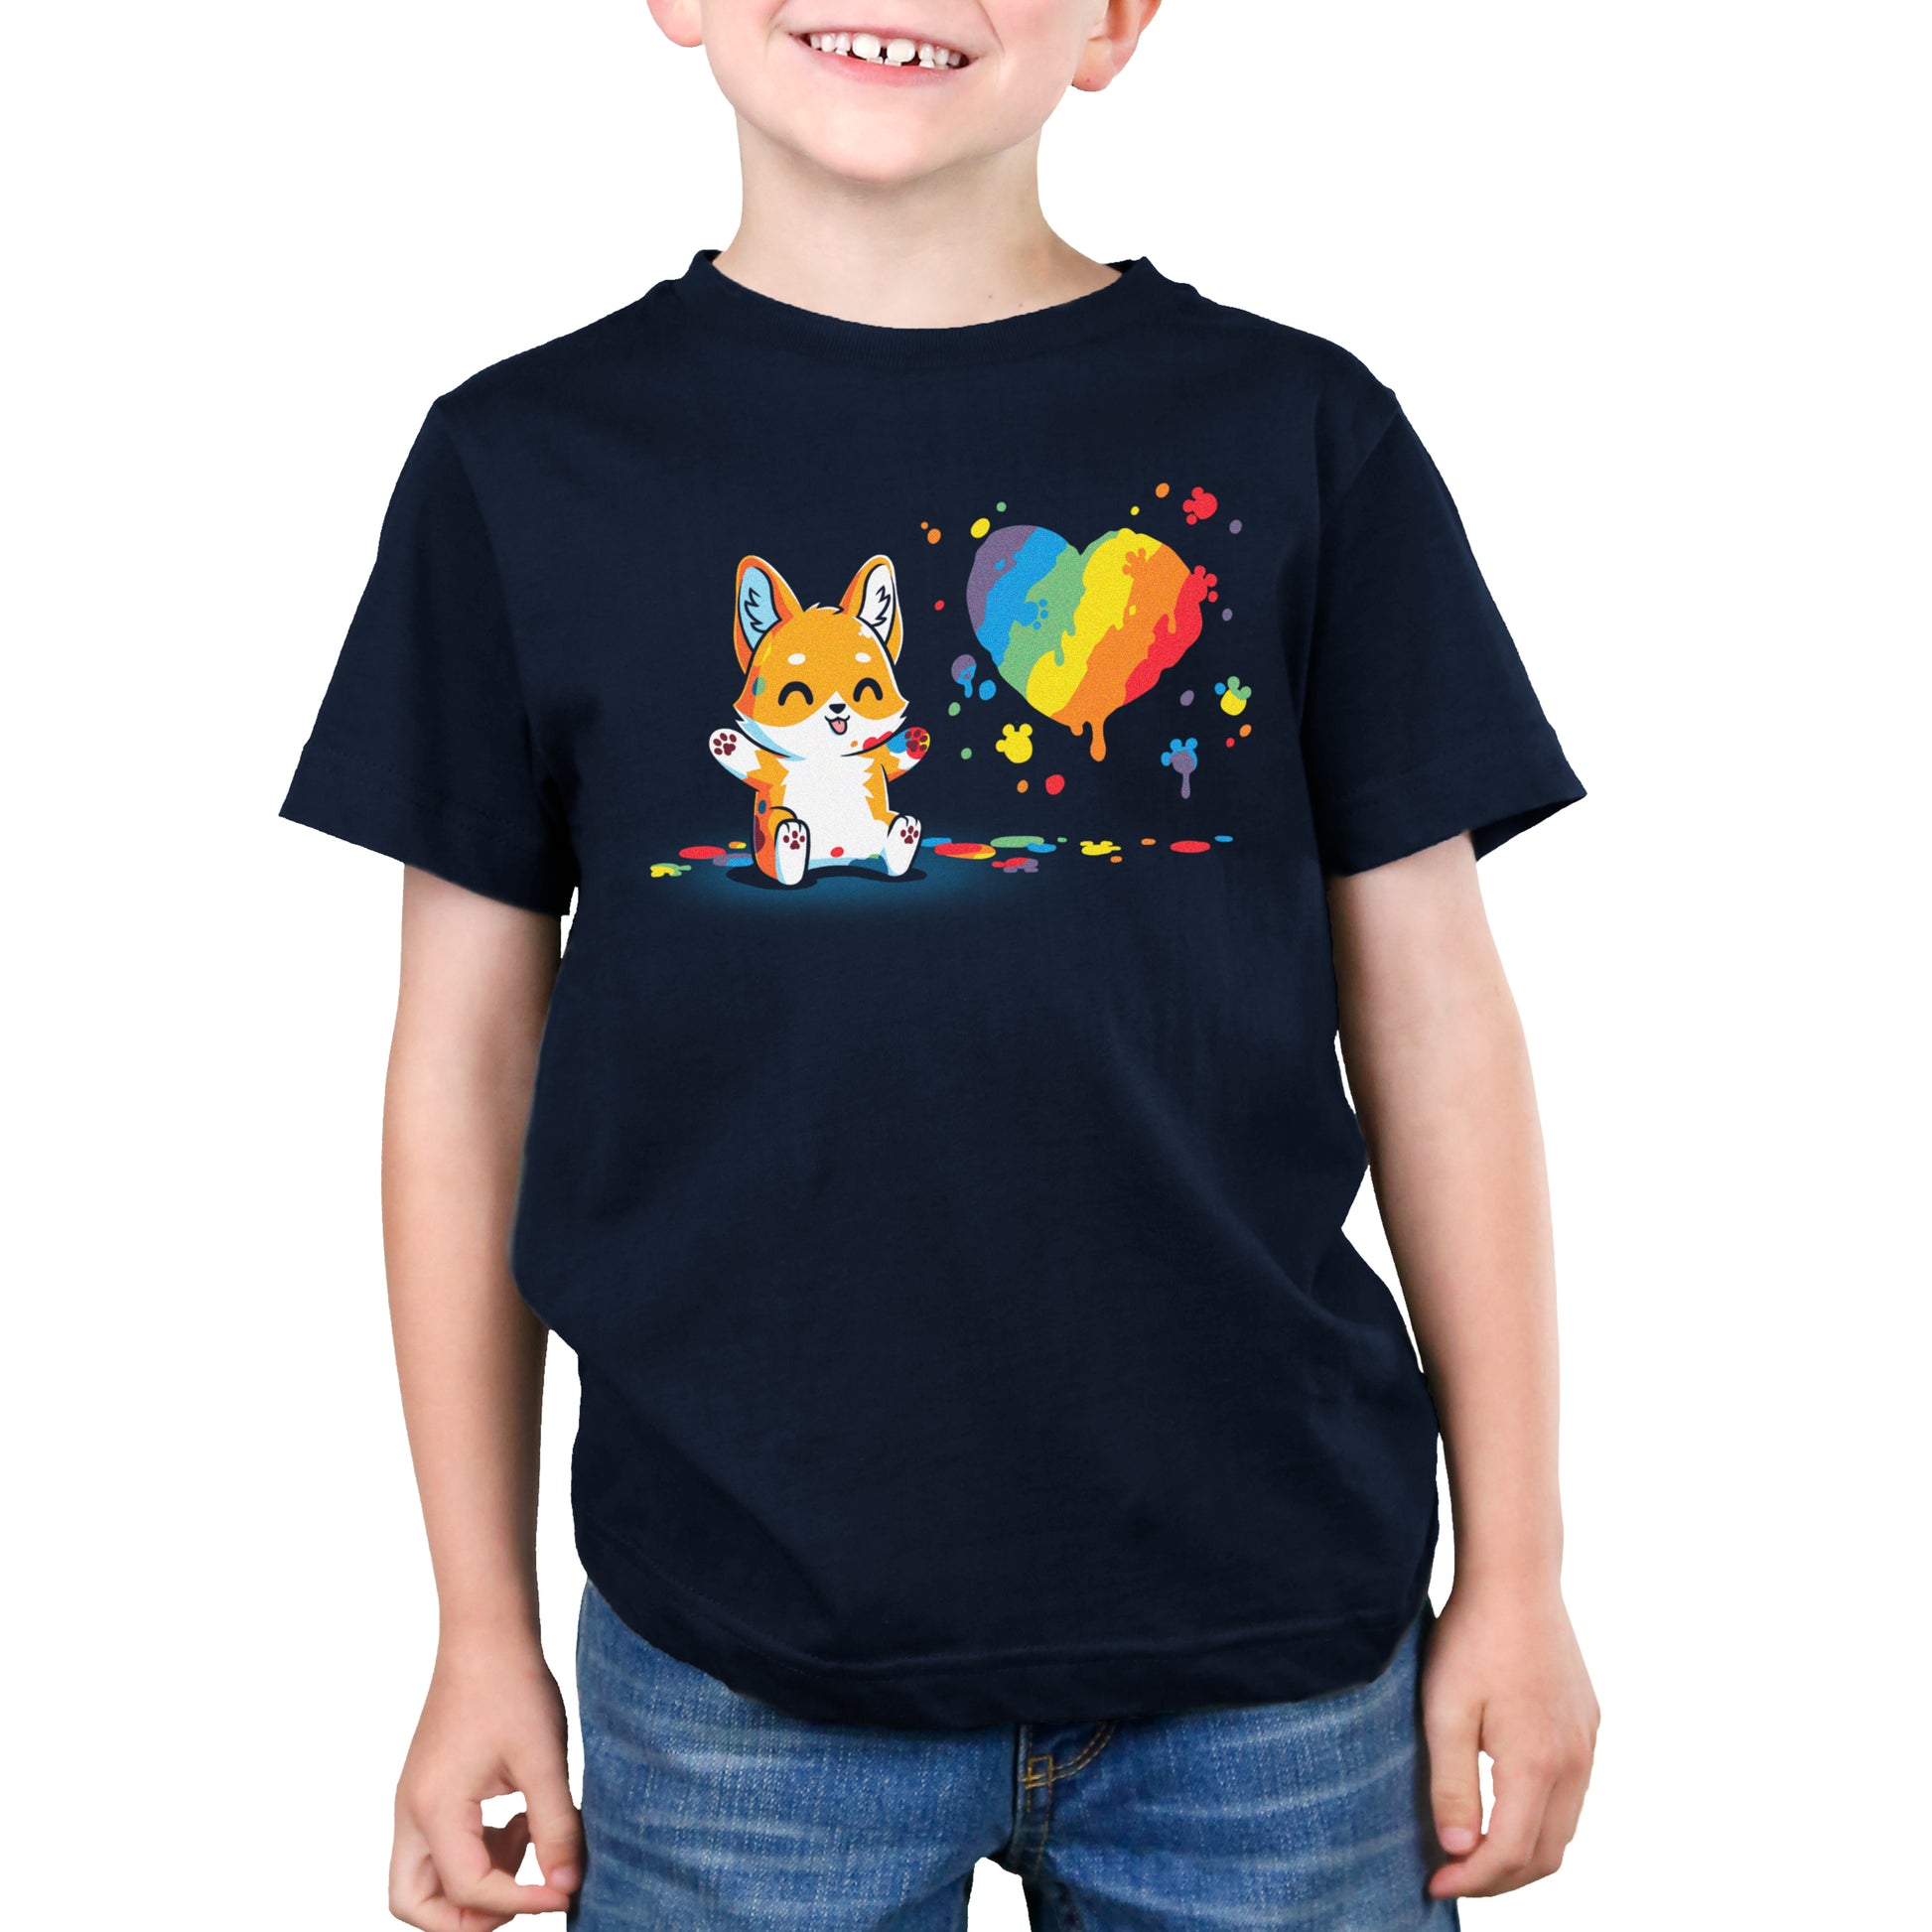 A young boy wearing a Paw Painting (Corgi) t-shirt by TeeTurtle.